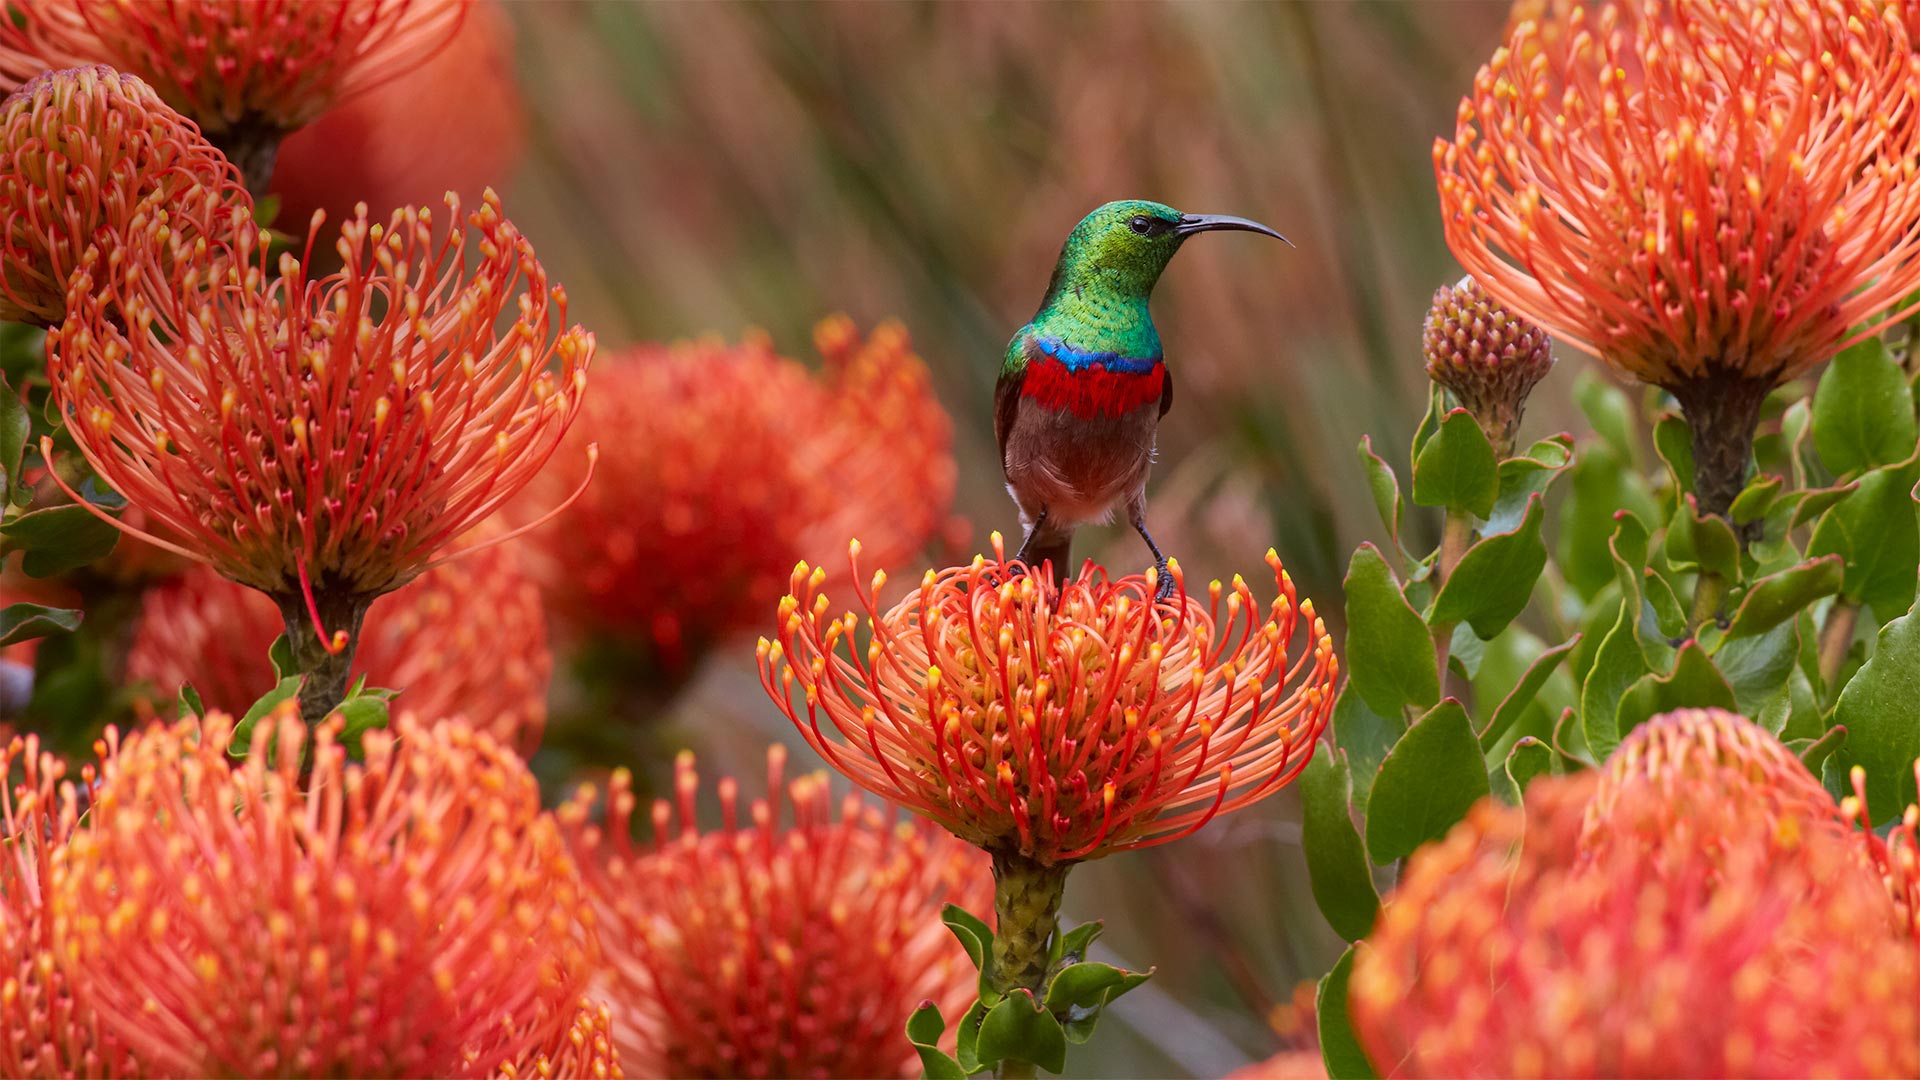 Male southern double-collared sunbird on a rocket pincushion flower, Cape Town, South Africa - Martin Willis